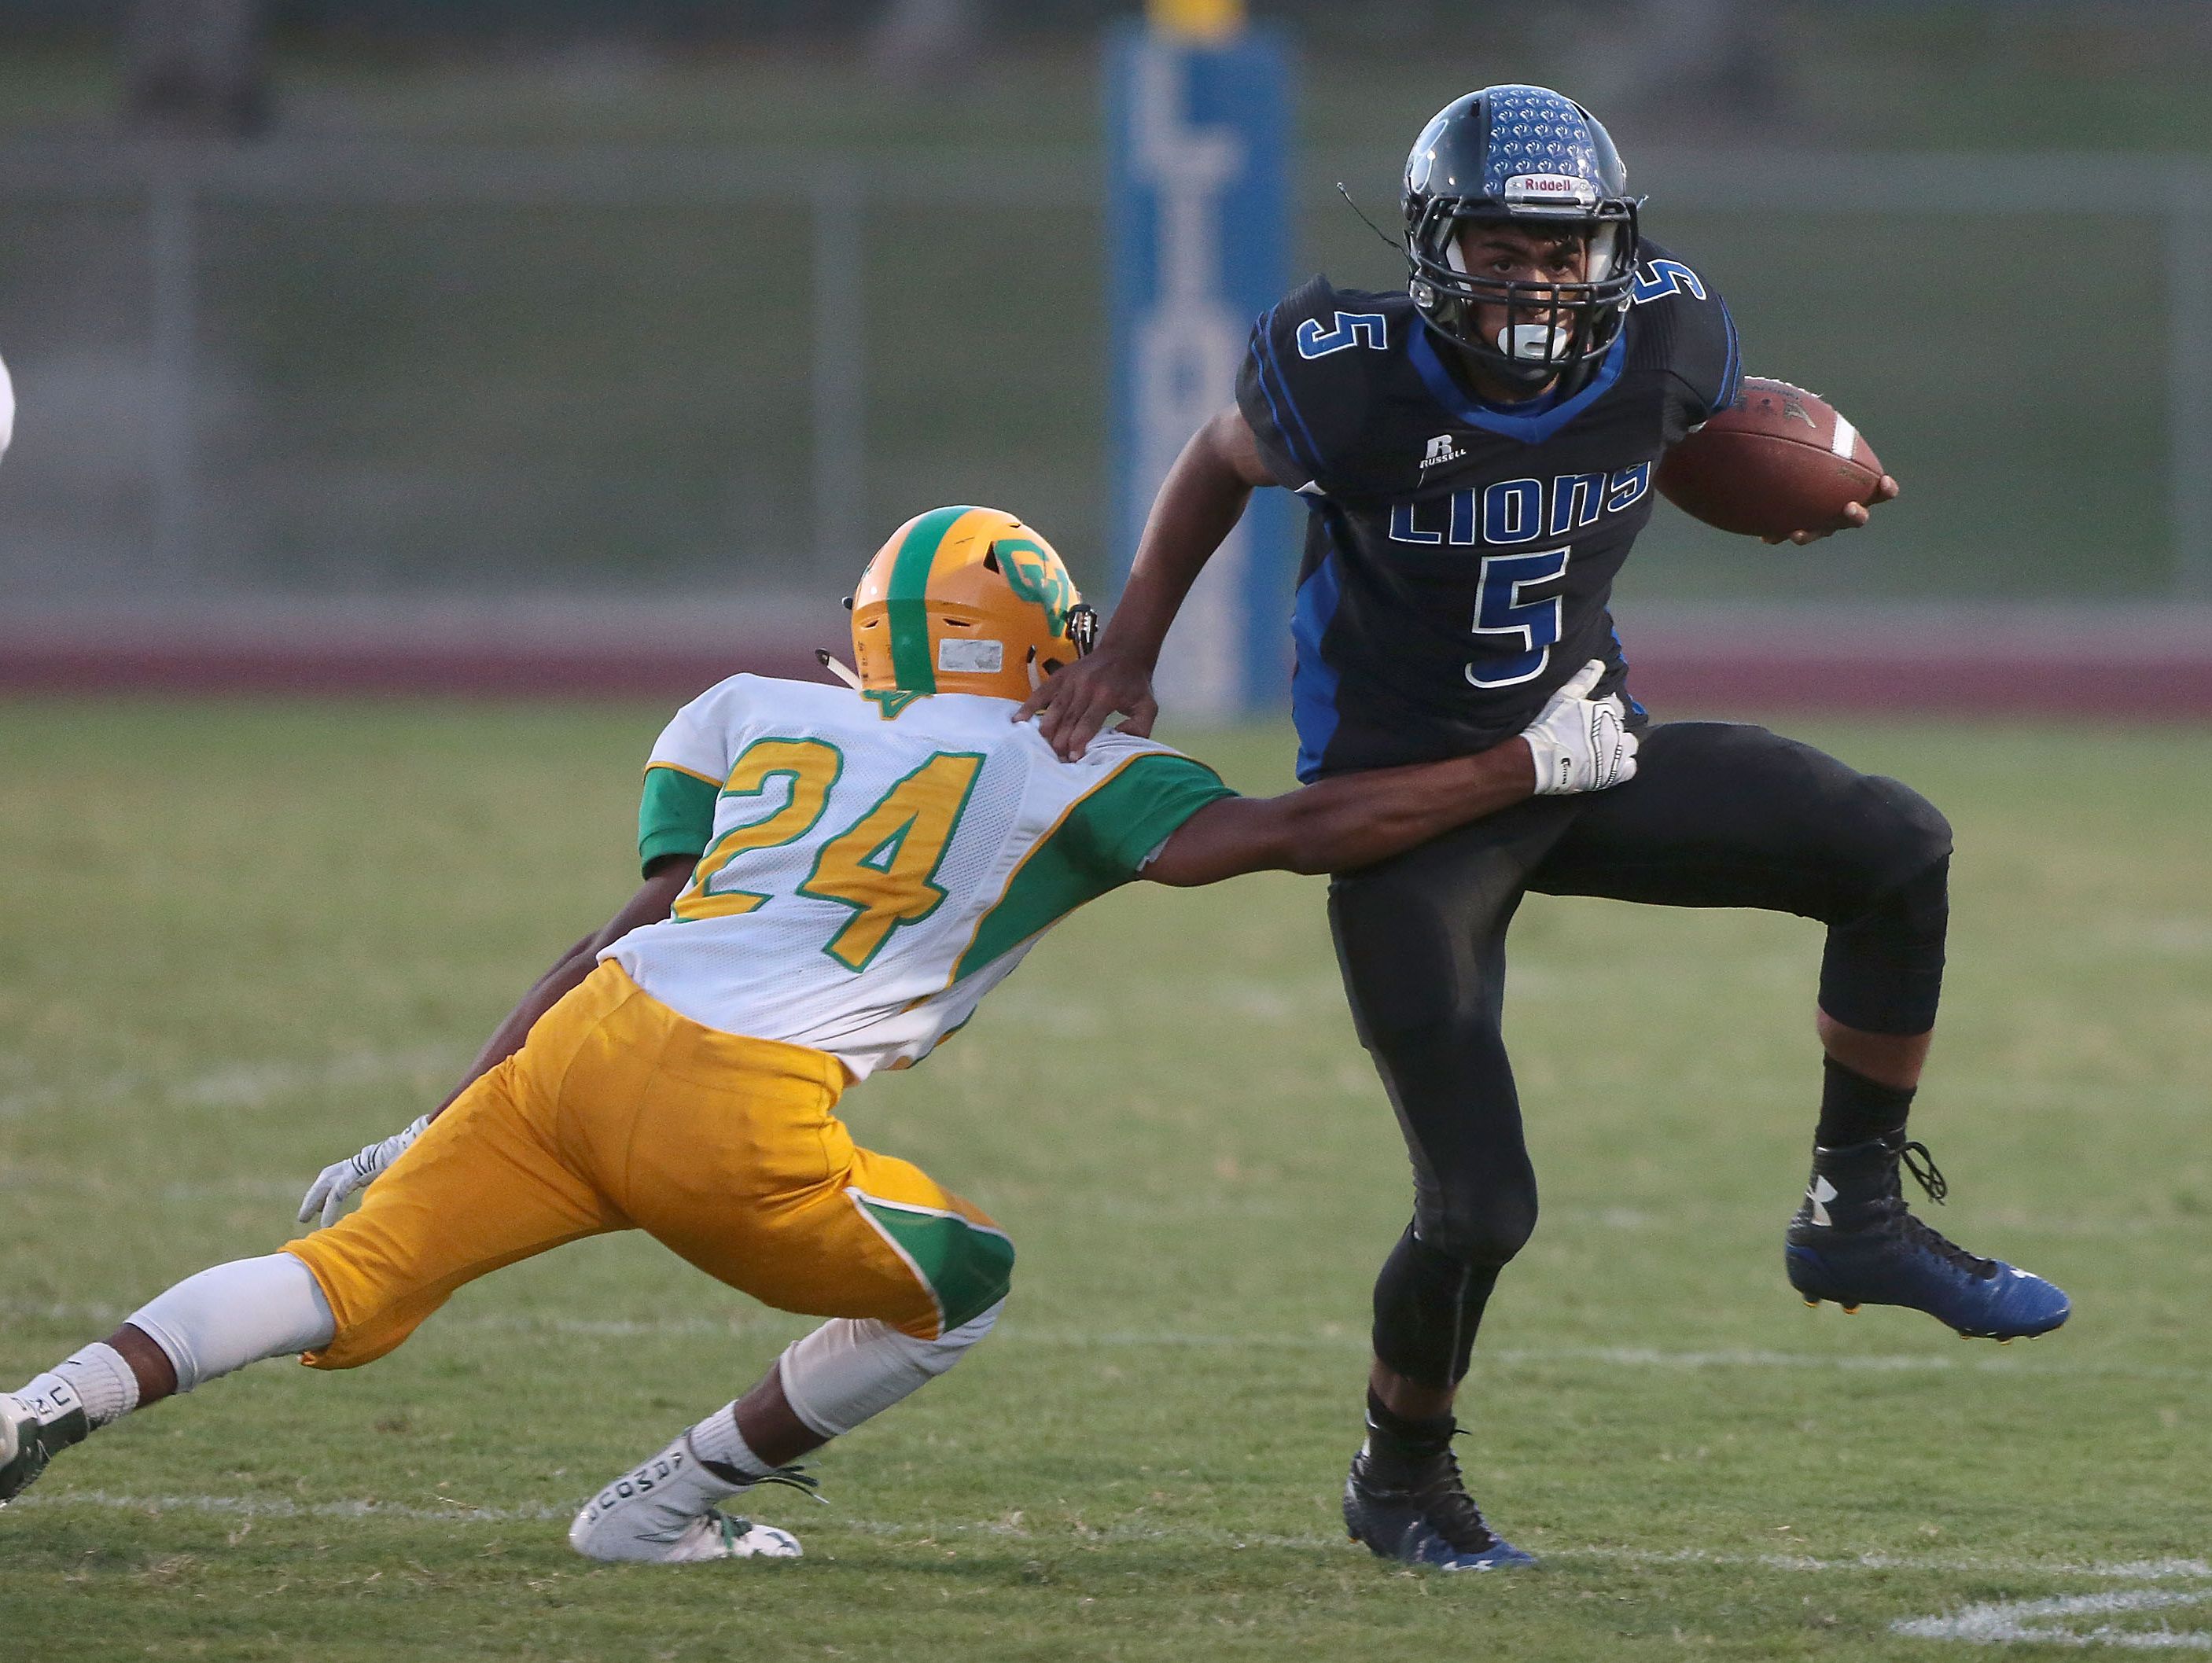 Cathedral City quarterback Jordan Wallace picks up yardage against Coachella Valley, August 26, 2016.